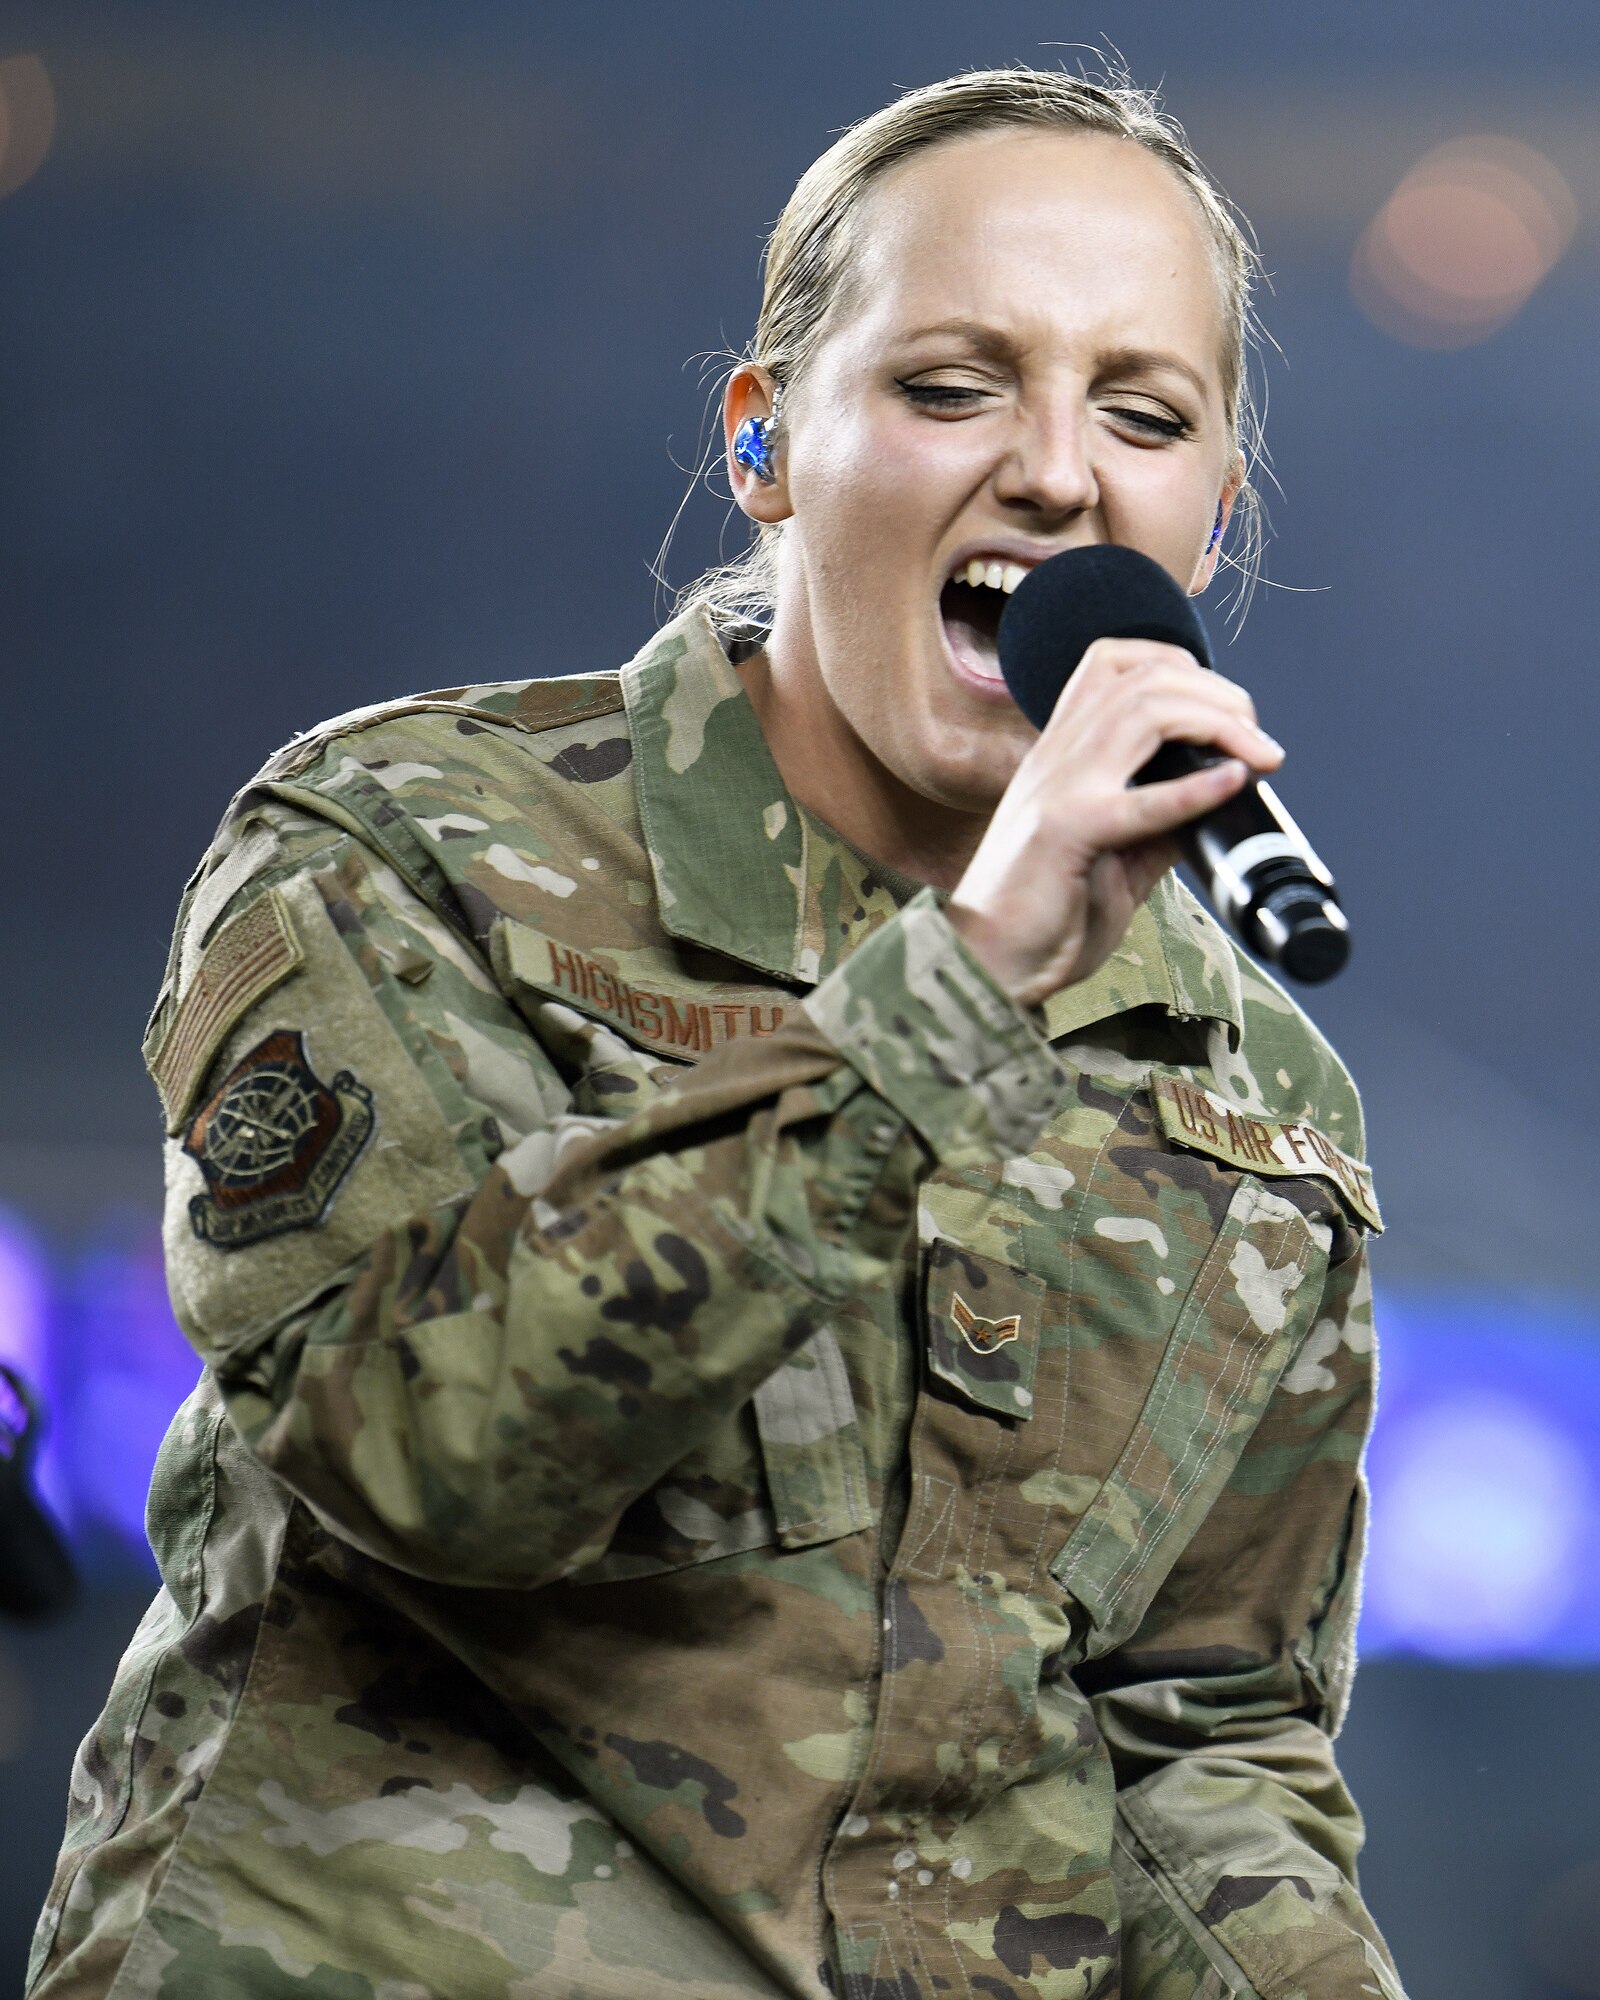 U.S. Air Force Airman 1st Class Kayla Highsmith, a vocalist with the U.S. Air Force Band of the Golden West, performs during halftime of the San Francisco Forty-Niners and New York Giants Monday Night Football game at Levi’s Stadium in Santa Clara, California, Nov. 12, 2018. The band performed in honor of Veterans Day and to support the National Football League’s Salute to Service Campaign. (U.S. Air Force photo by Louis Briscese)